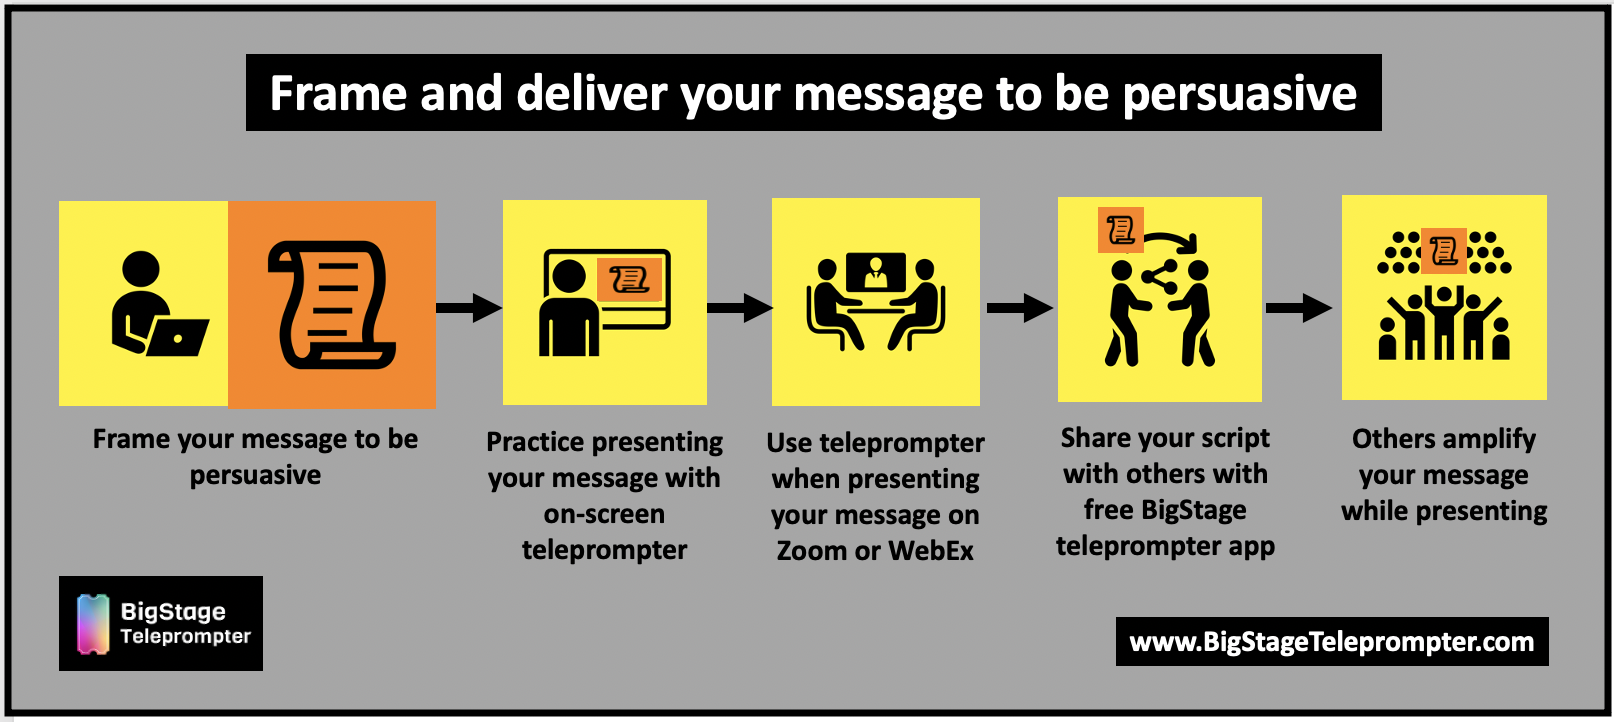 Frame and deliver your message on Zoom or WebEx more persuasively with the BigStage Teleprompter